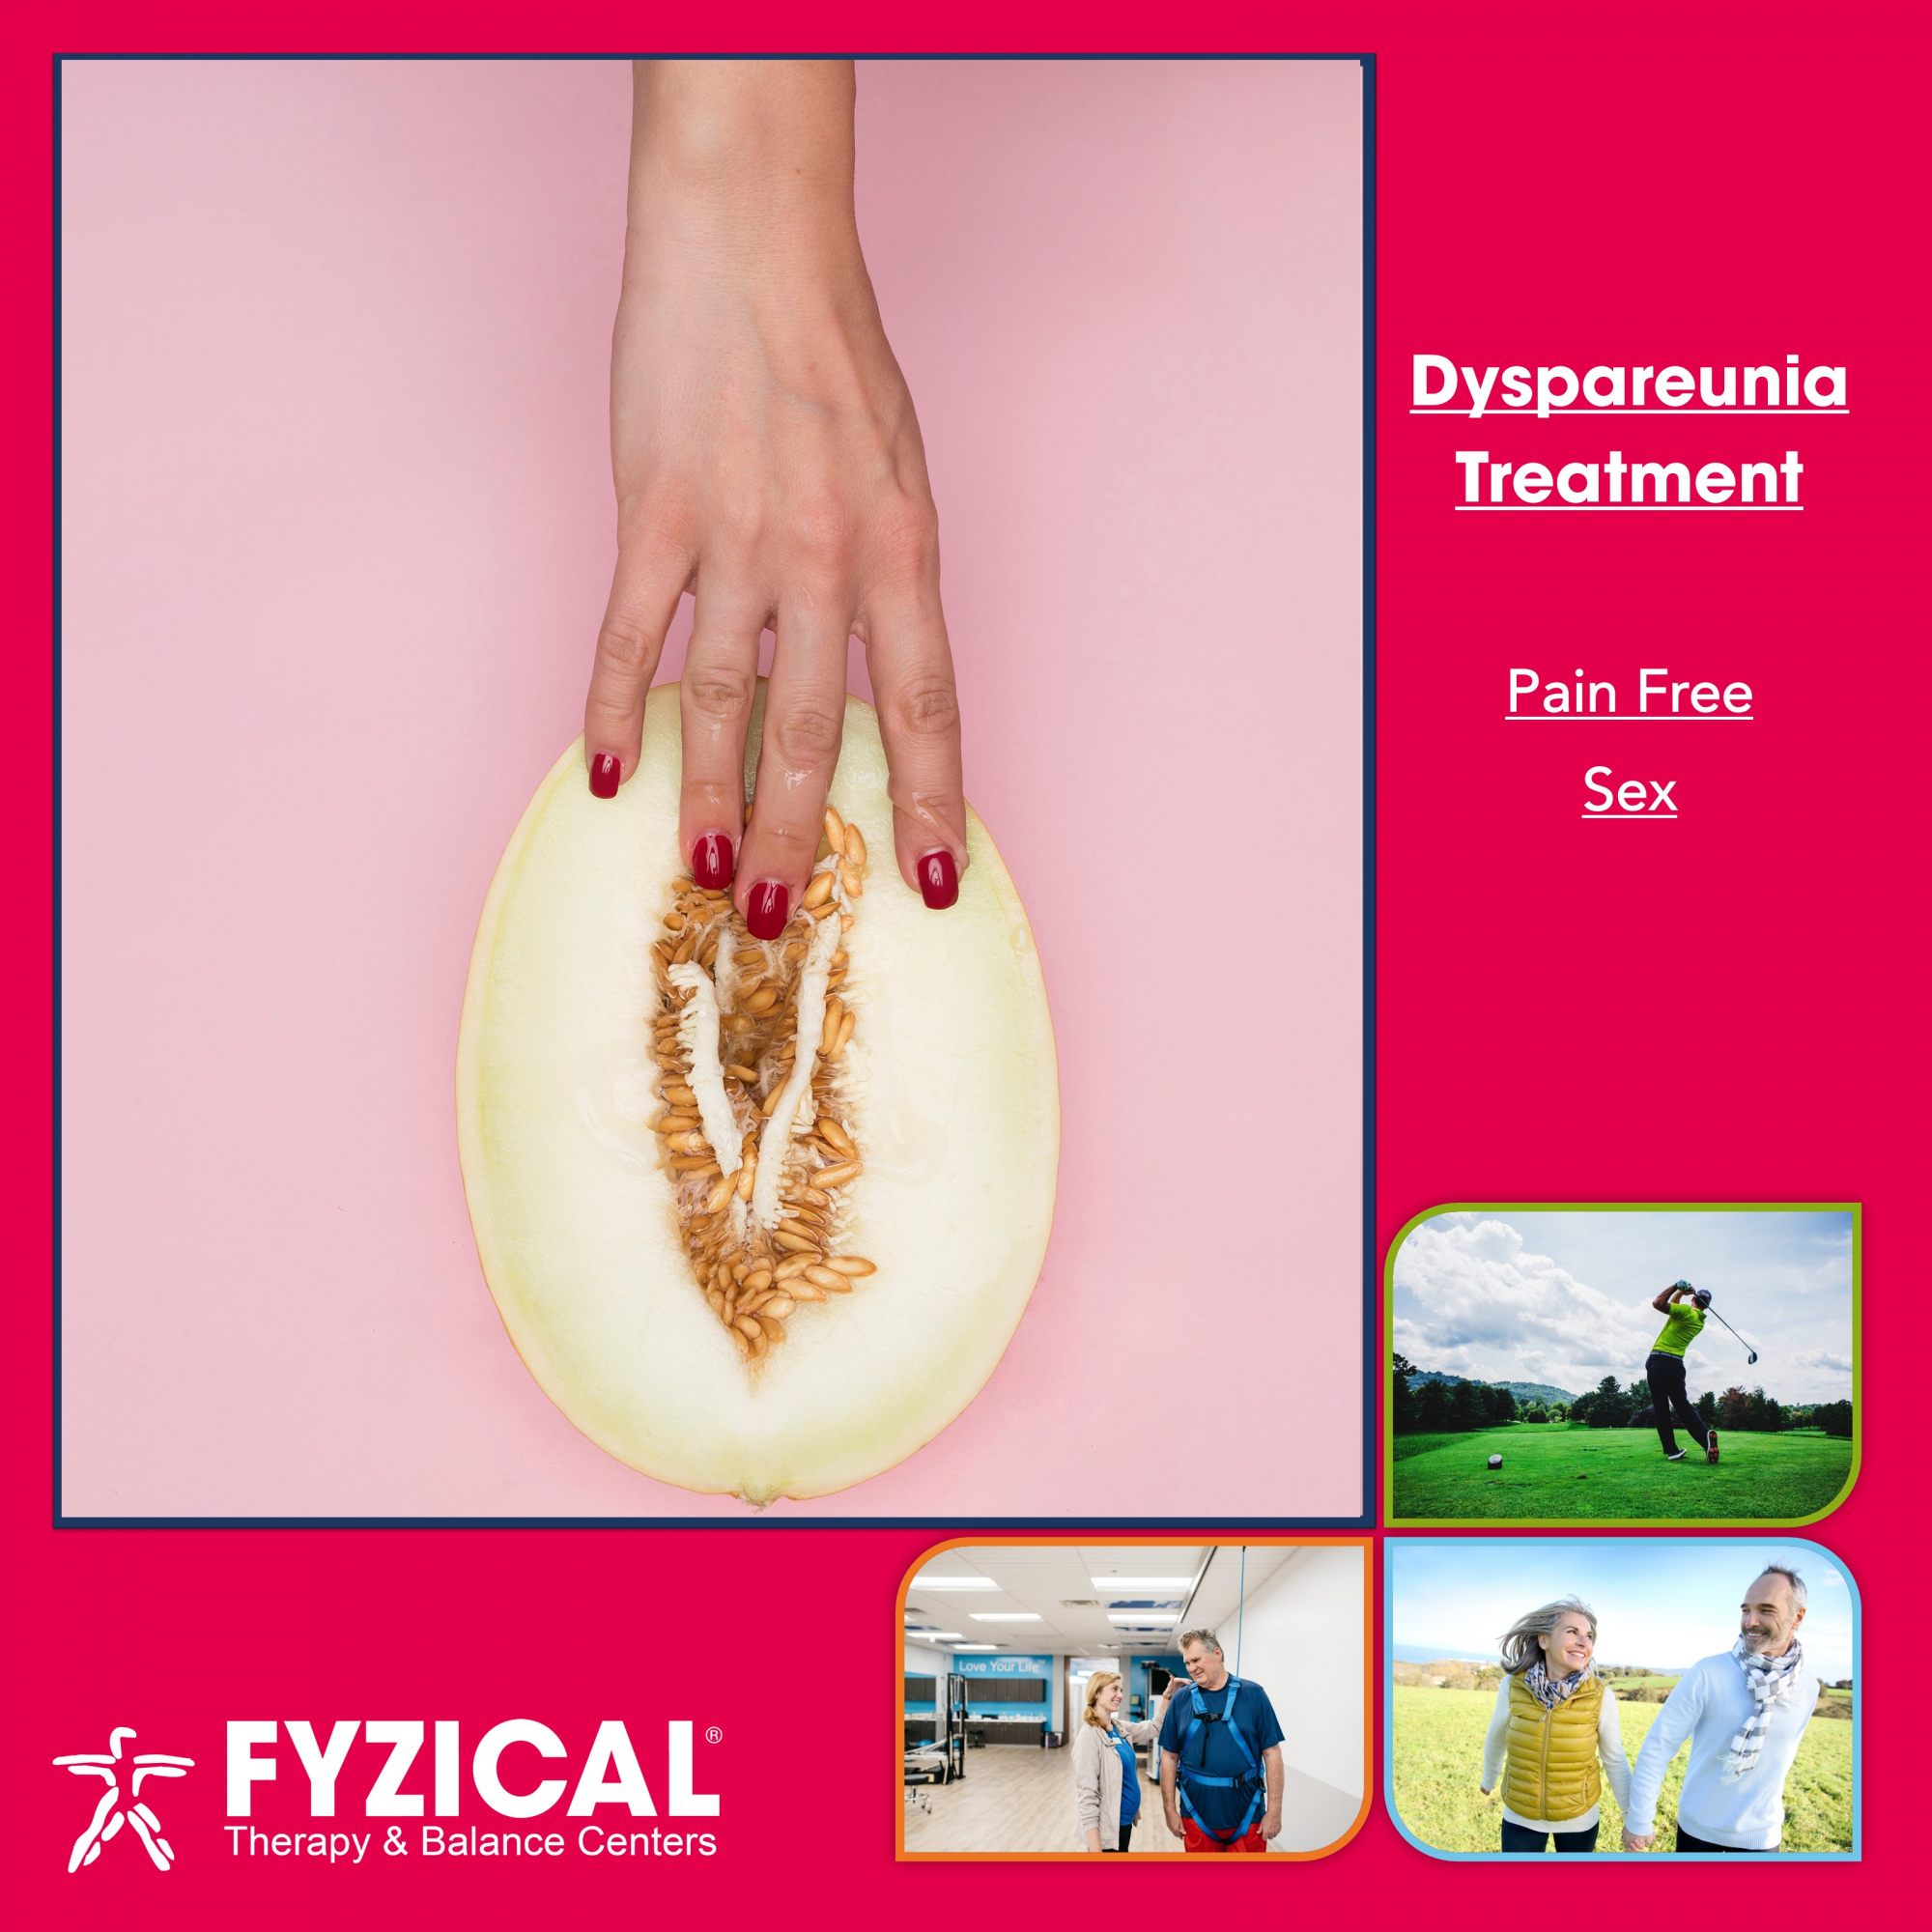 Physical Therapy for Dyspareunia Treatment pic